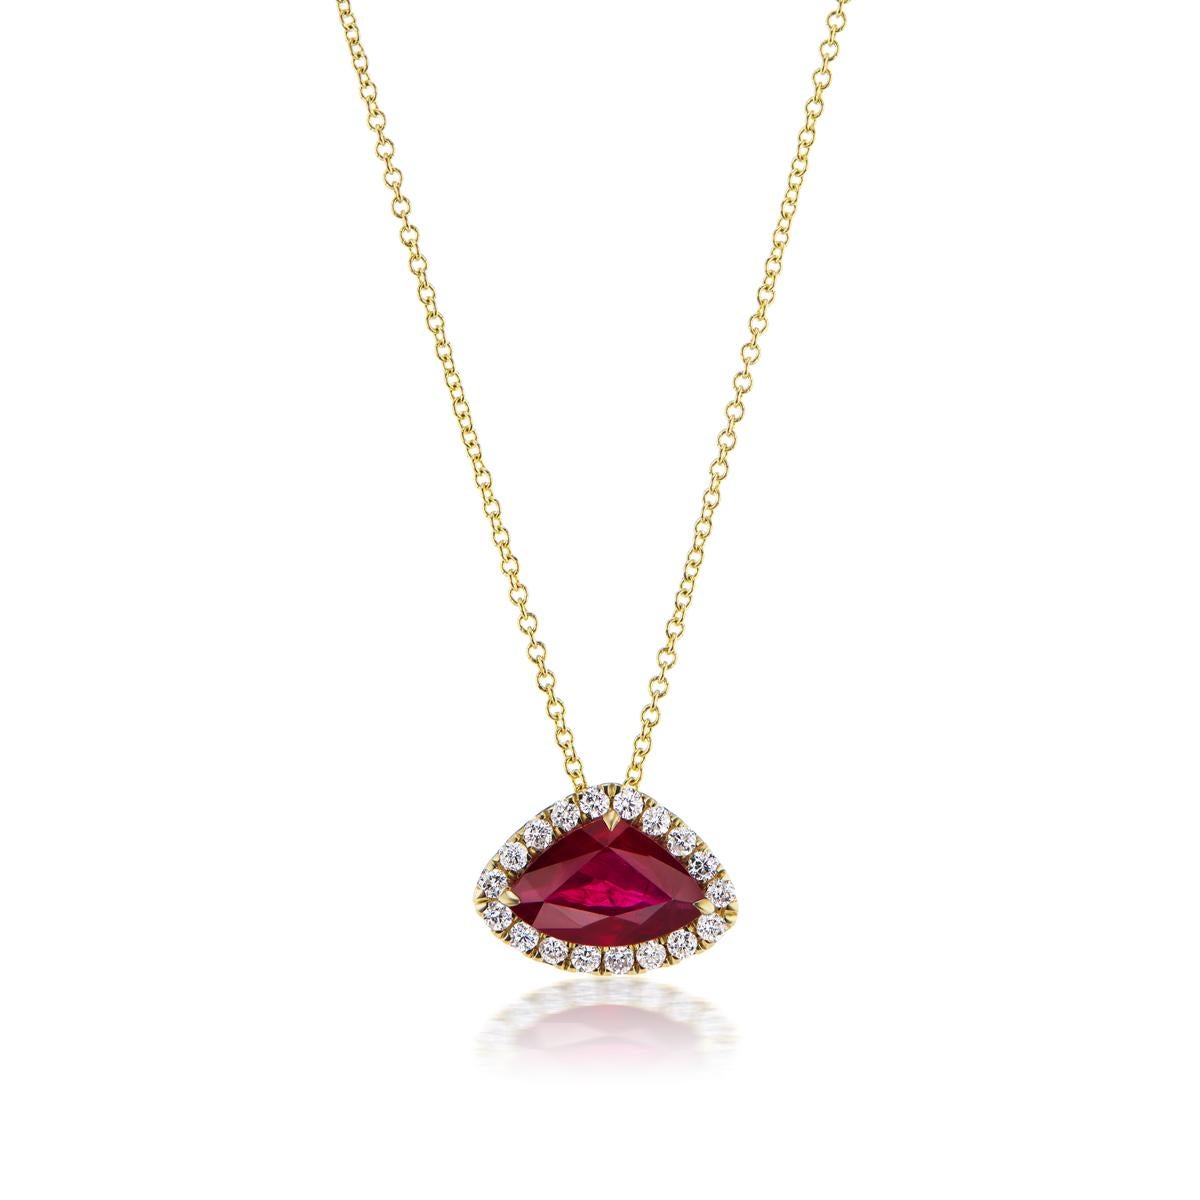 BURMESE RUBY AND DIAMOND PENDANT
Crafted in 14K Yellow Gold this trillion cut Burmese Ruby surrounded by diamonds is a delight for the eye
Item:	# 03975
Metal:	14k Yellow Gold
Lab:	Aigs
Color Weight:	1.63 ct.
Diamond Weight:	0.24 ct.